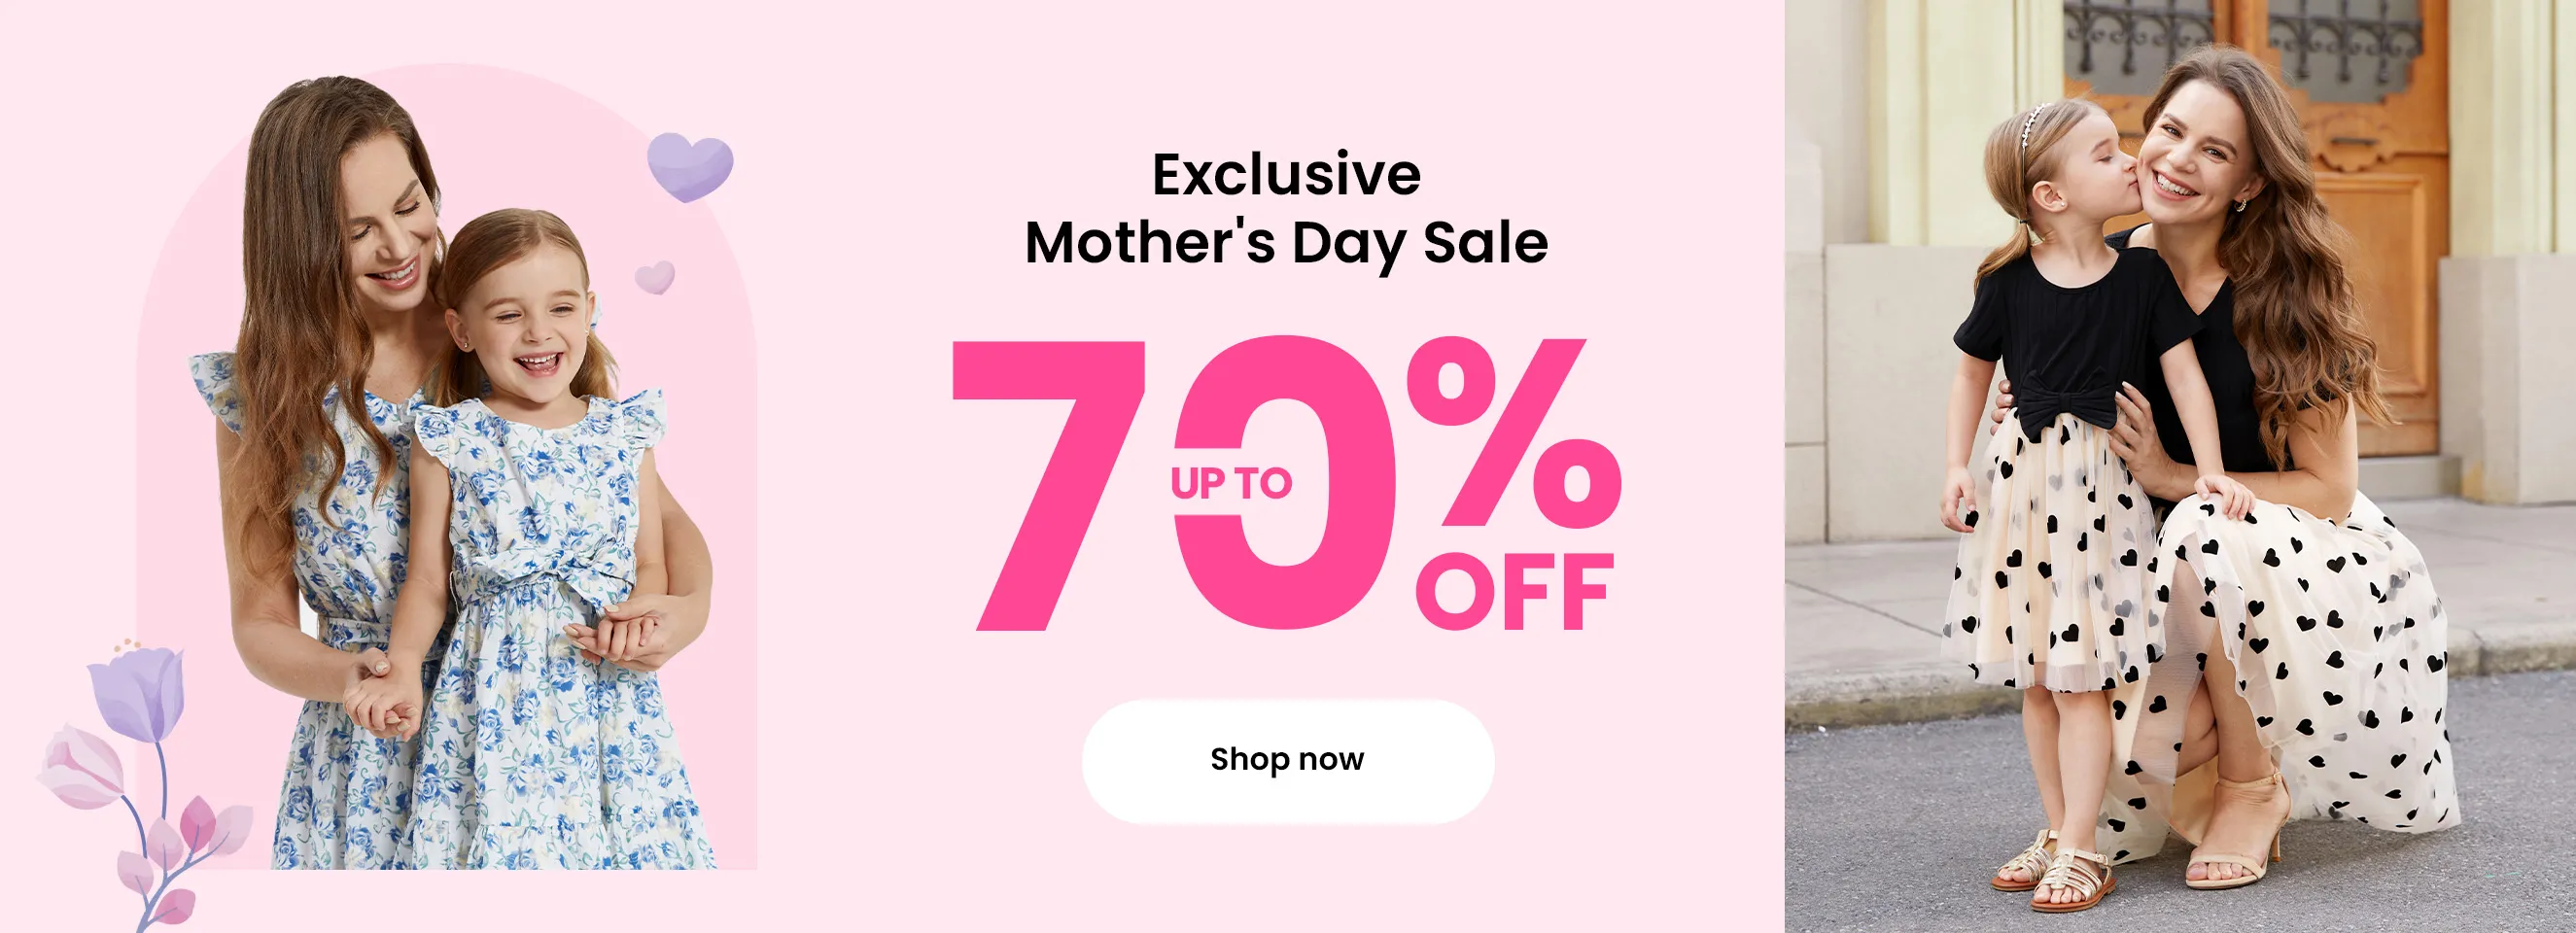 Click it to join Exclusive Mother's Day Sale activity